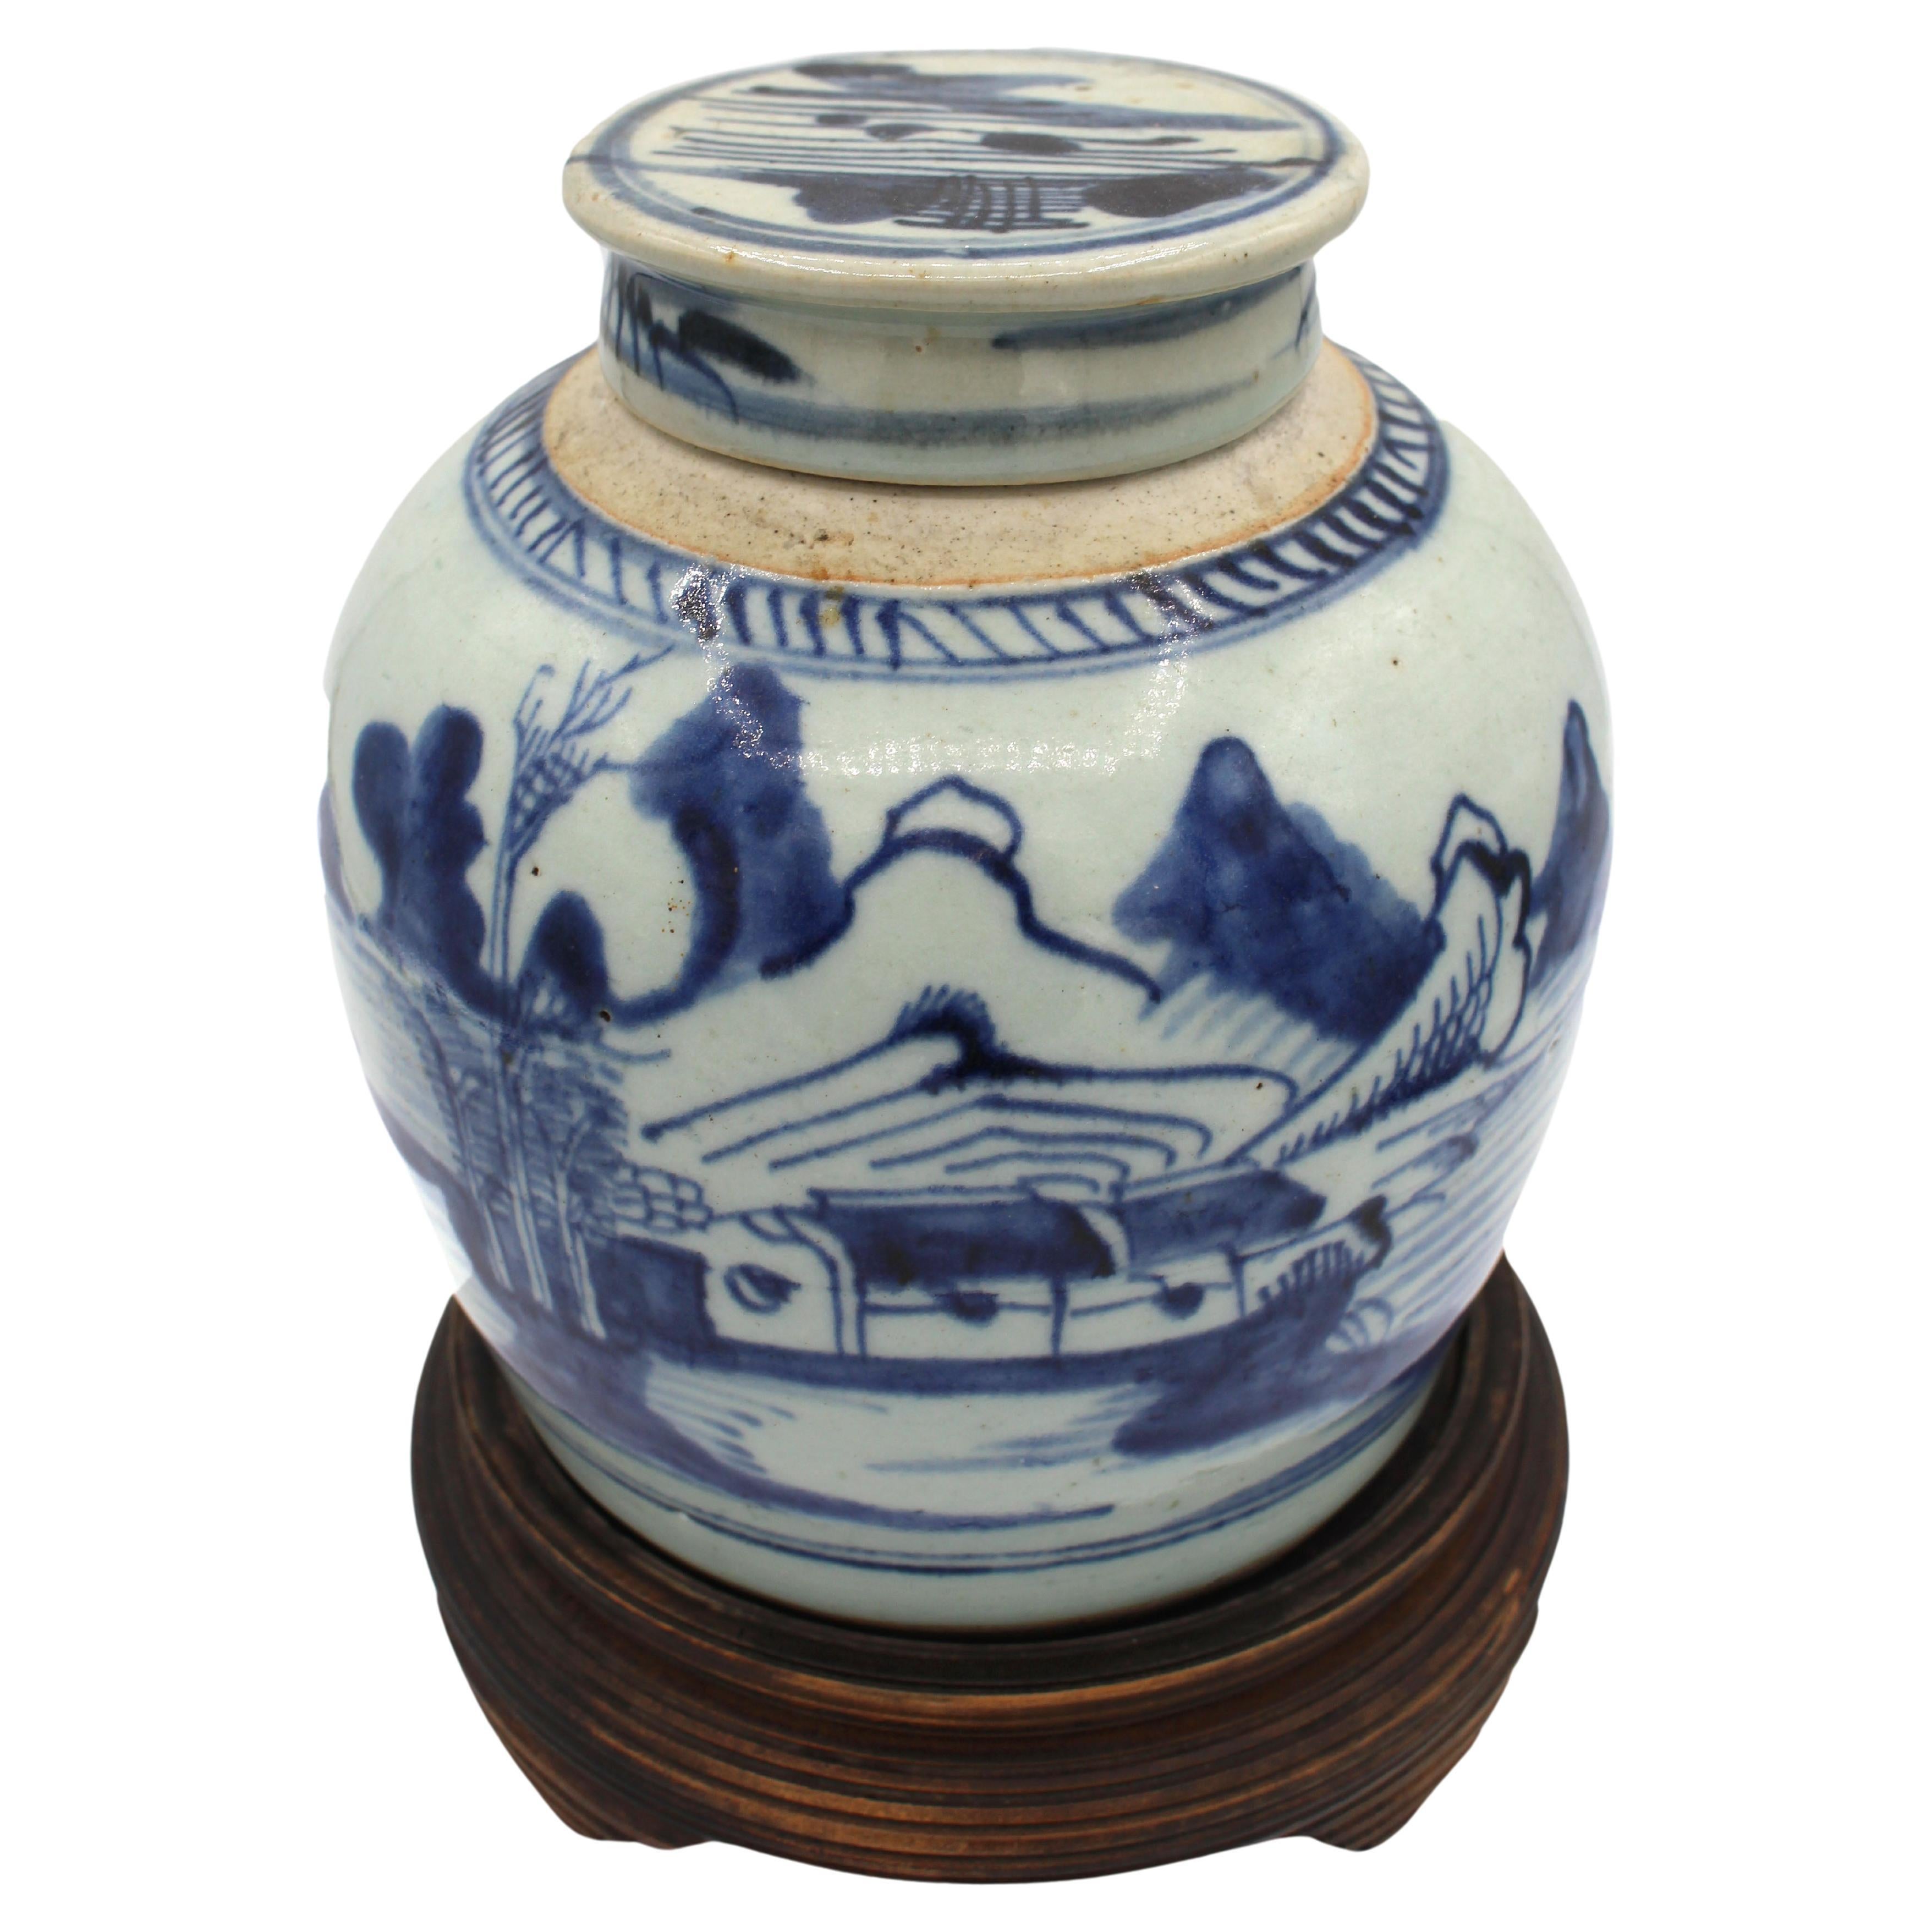 Later 19th Century Celadon & Blue Decorated Ginger Jar with Cover, Qing Dynasty